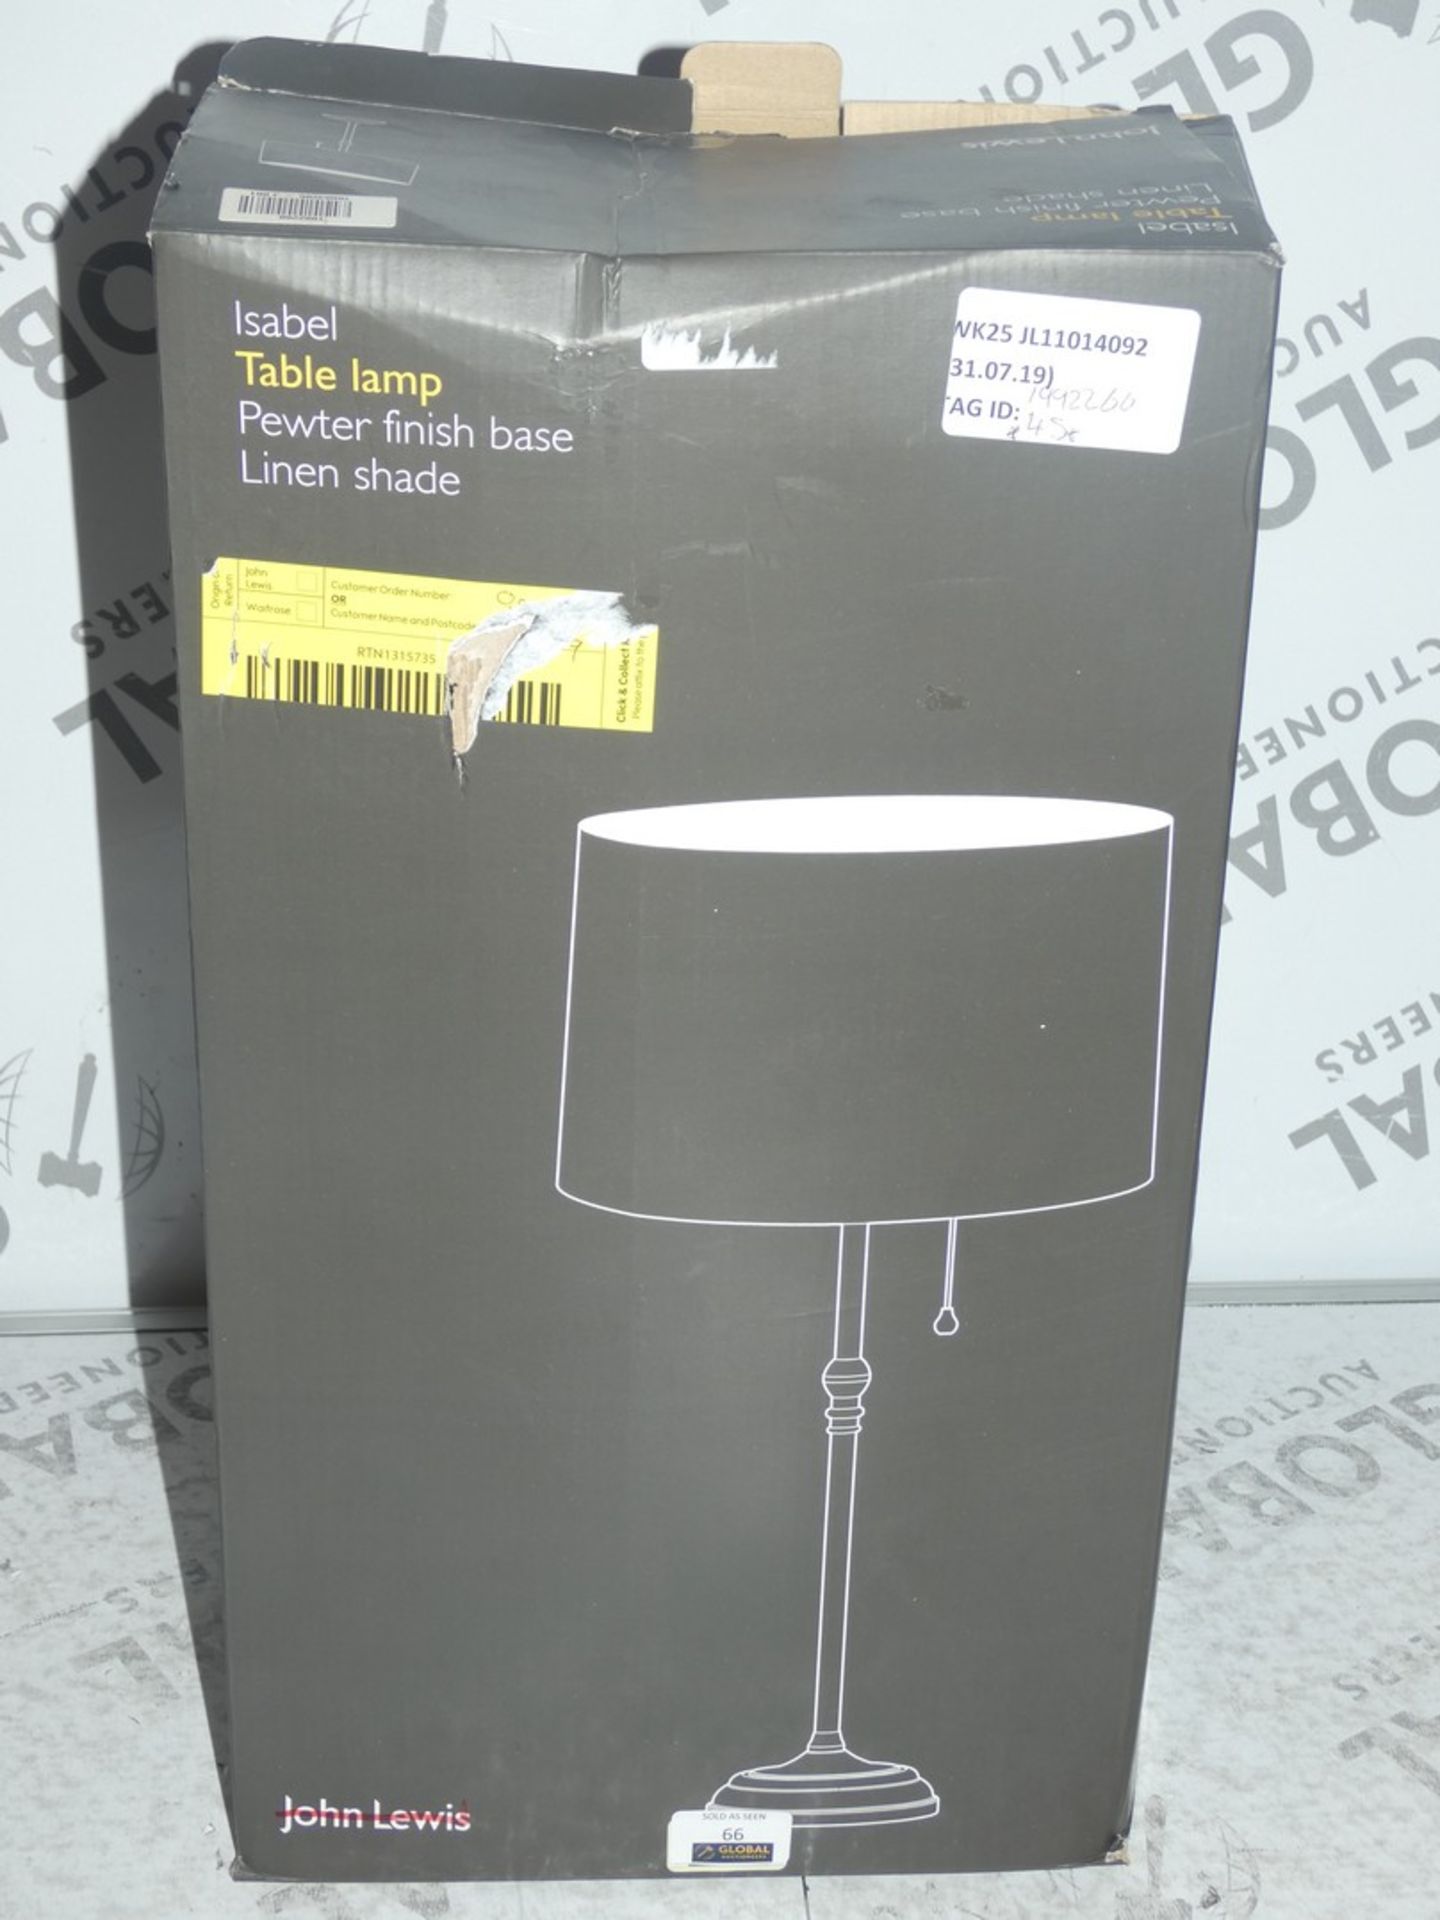 Boxed John Lewis and Partners Isobel Pewter Finish Base Linen Shade Table Lamp RRP £45 (1991266) (